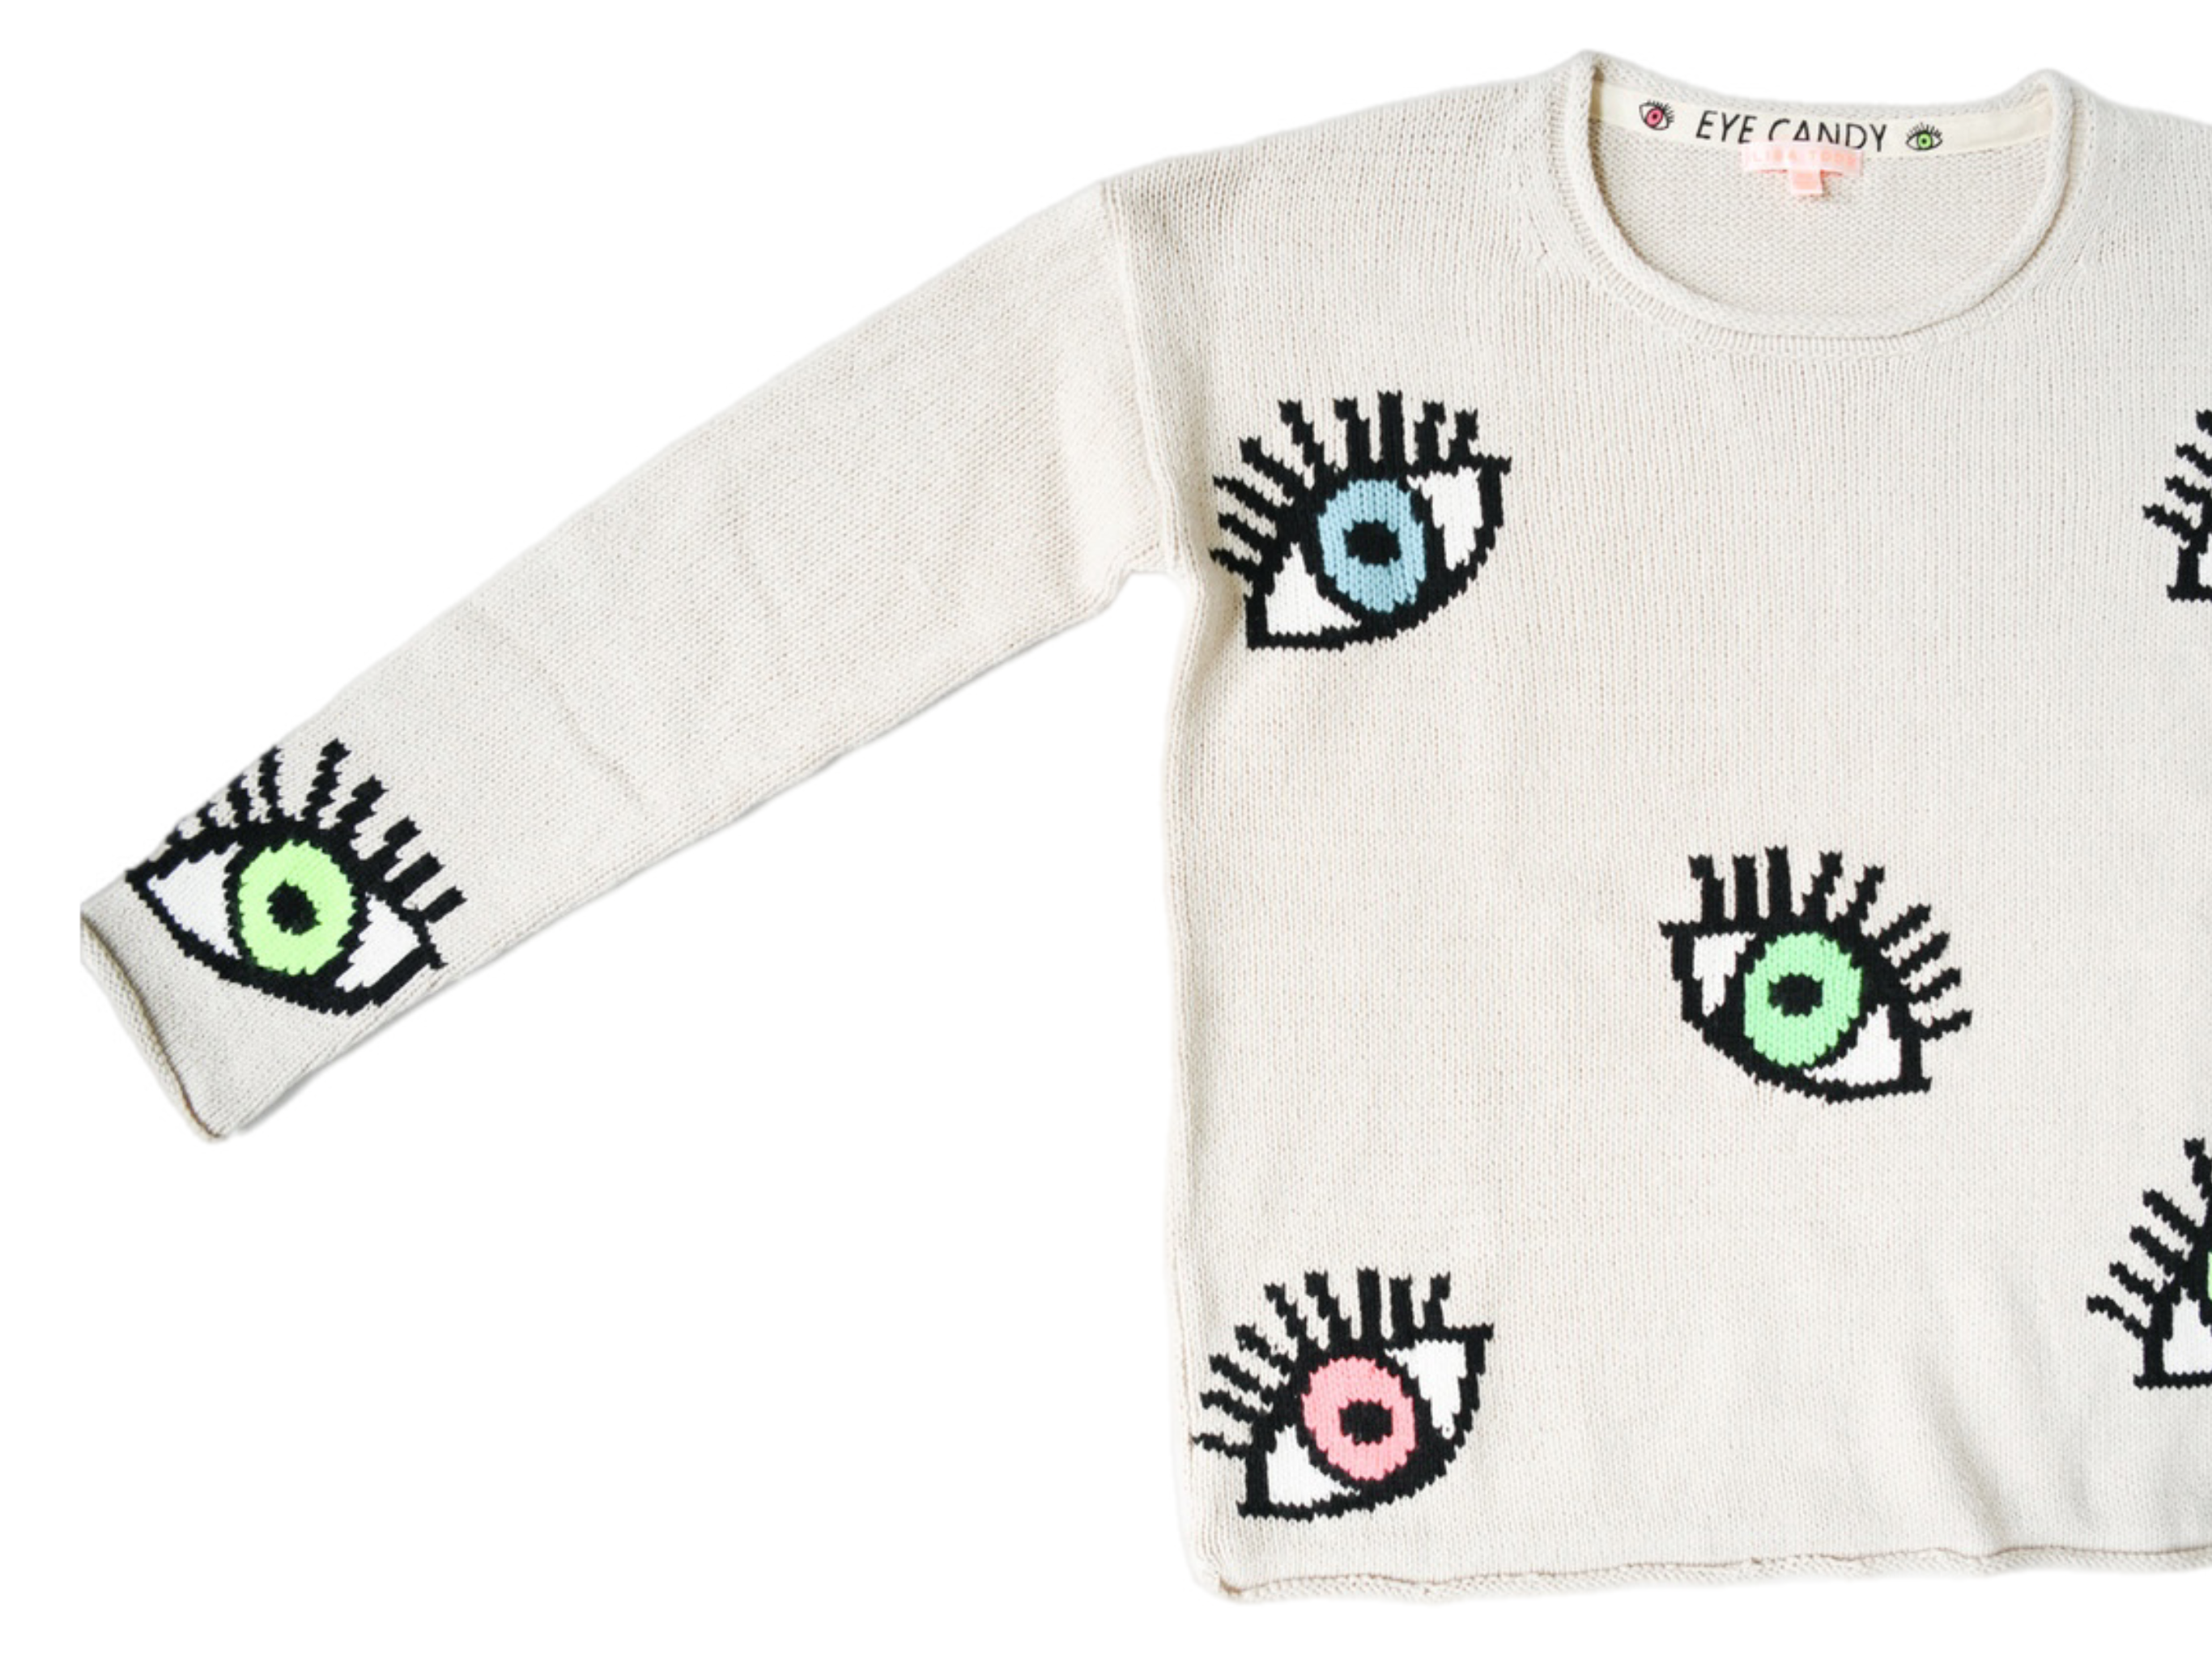 LISA TODD EYES ON YOU SALTY SWEATER